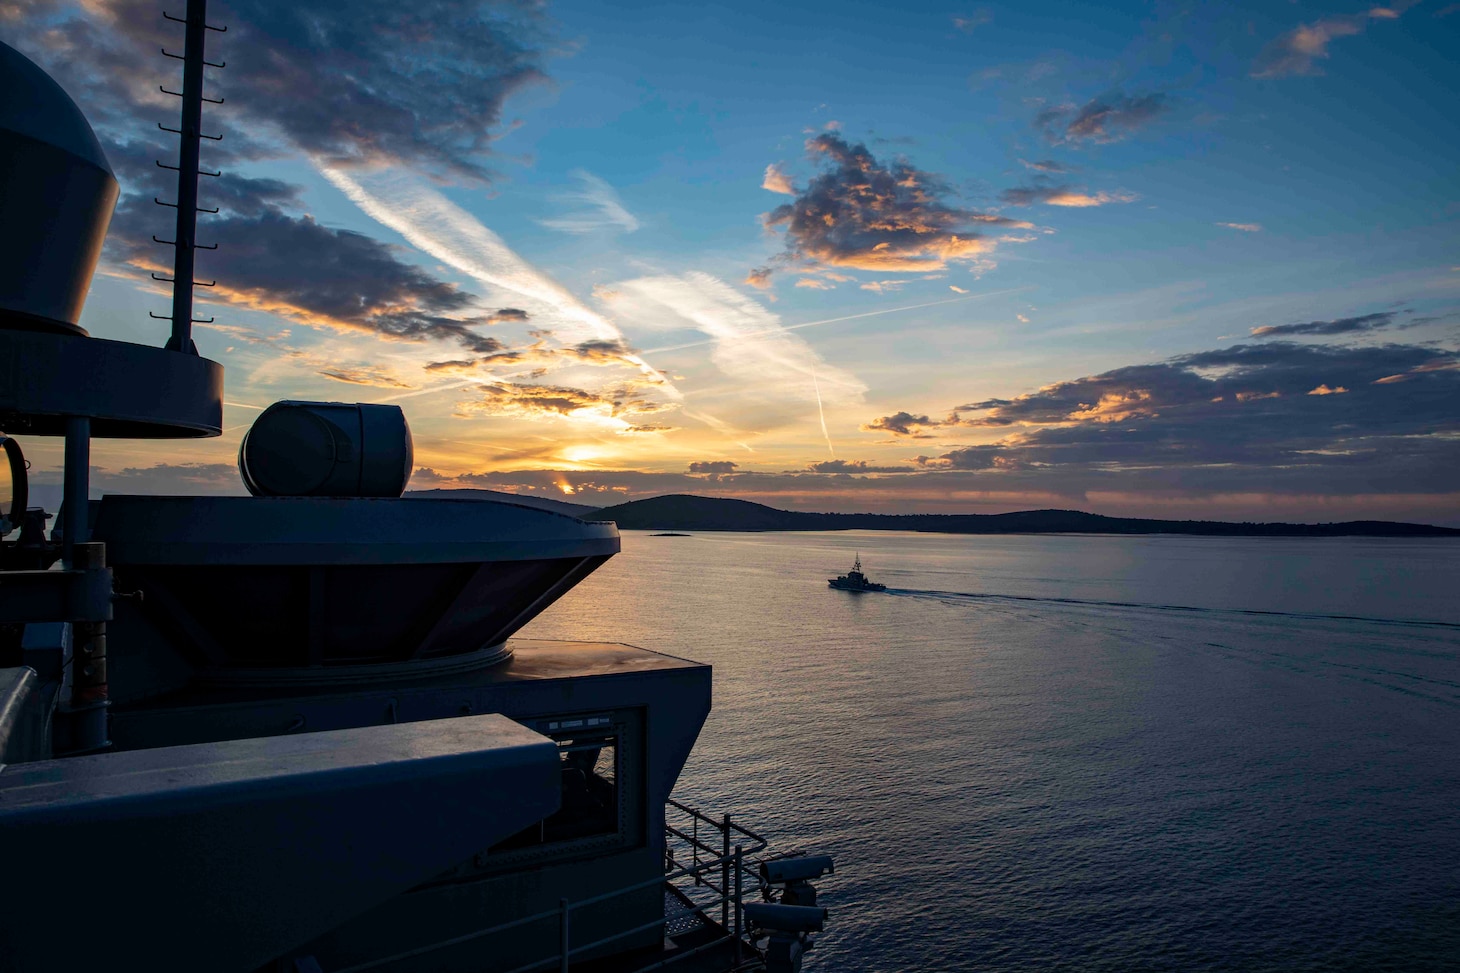 The Nimitz-class aircraft carrier USS George H.W. Bush (CVN 77), along with the embarked staff of Carrier Strike Group (CSG) 10, arrives in Split, Croatia, for a scheduled port visit Nov. 3, 2022.